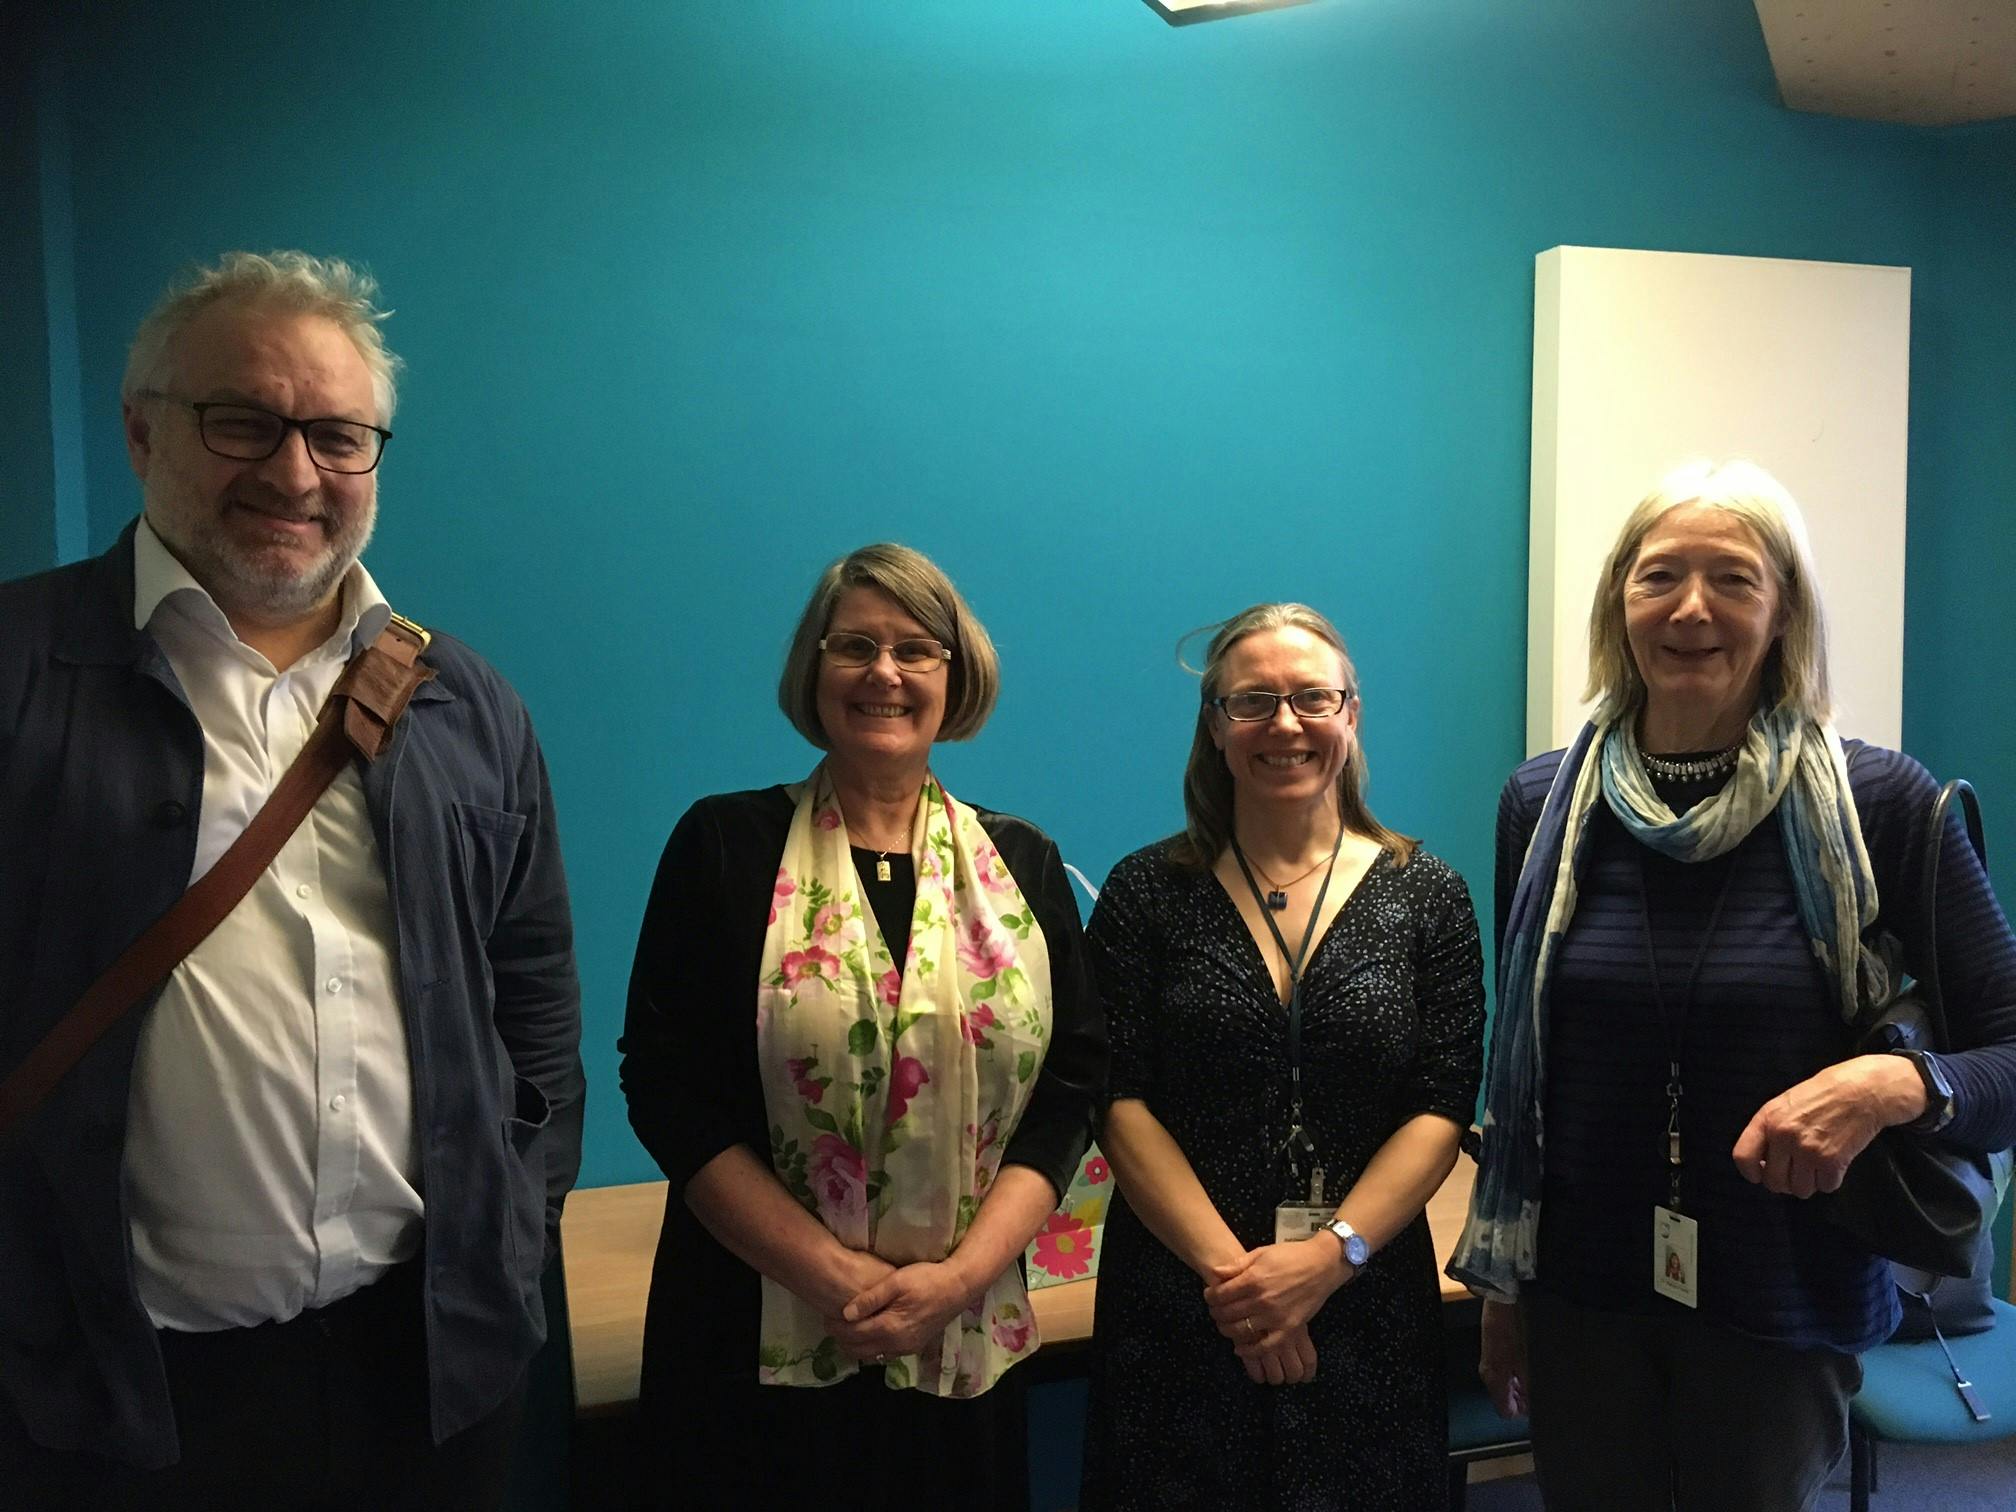 Image of Lesley Boyd with her PhD examiners [Left to Right - Phil Wood, External Examiner, Lesley Boyd, Alison Fox, Internal Examiner, Maggie Preedy, Chair.